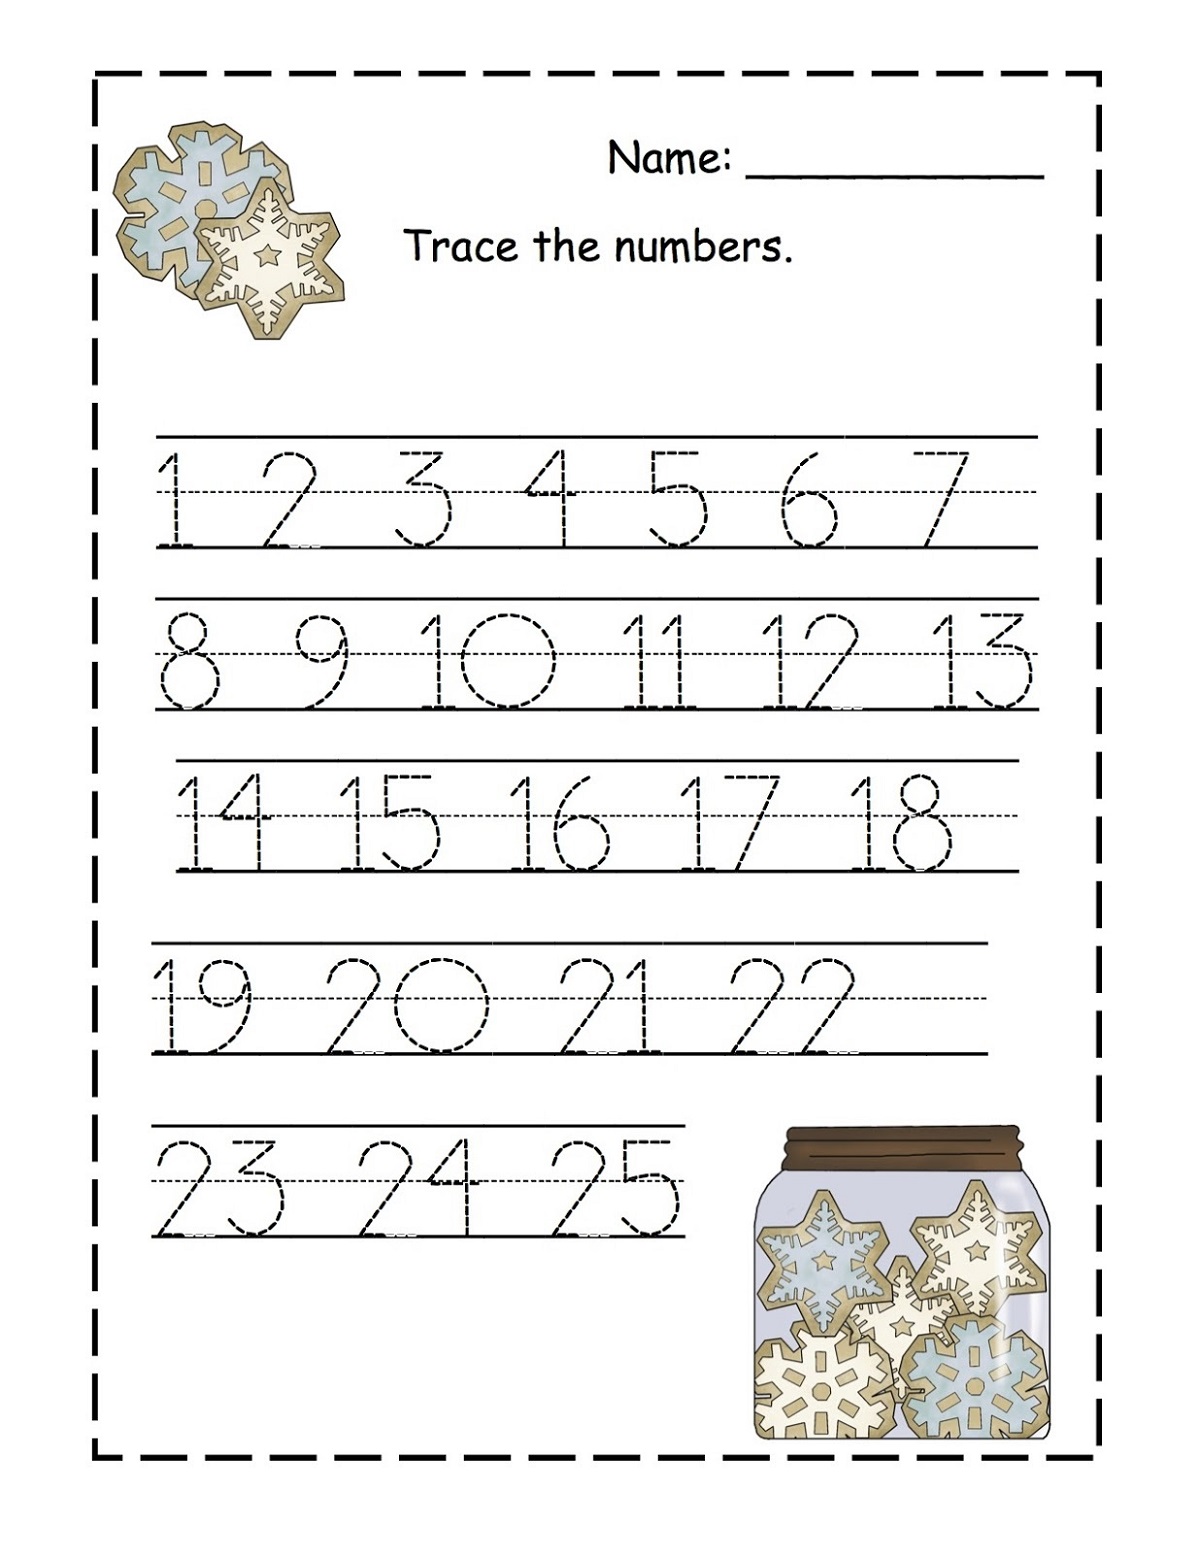 Printable Number Trace Worksheets For Preschool 101 Activity